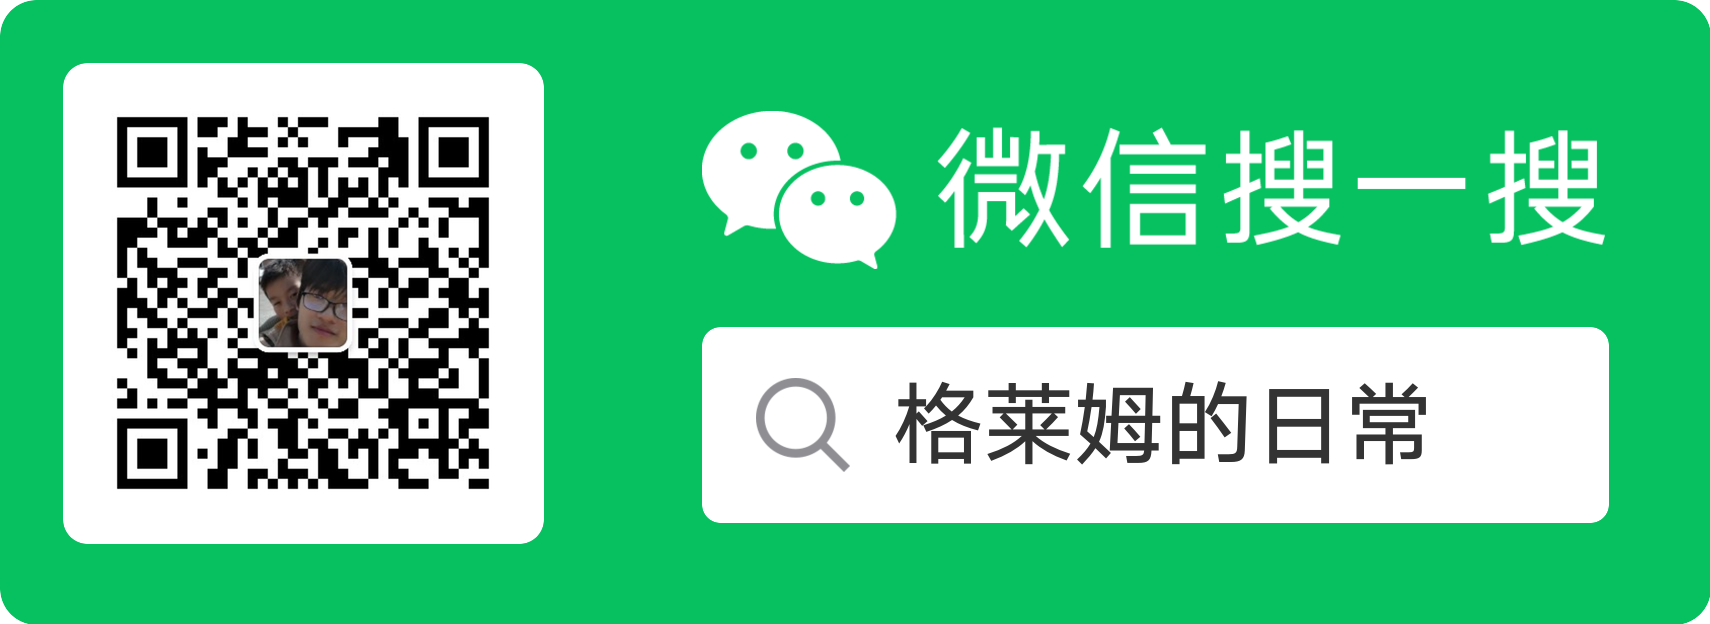 WeChat_Official_Account